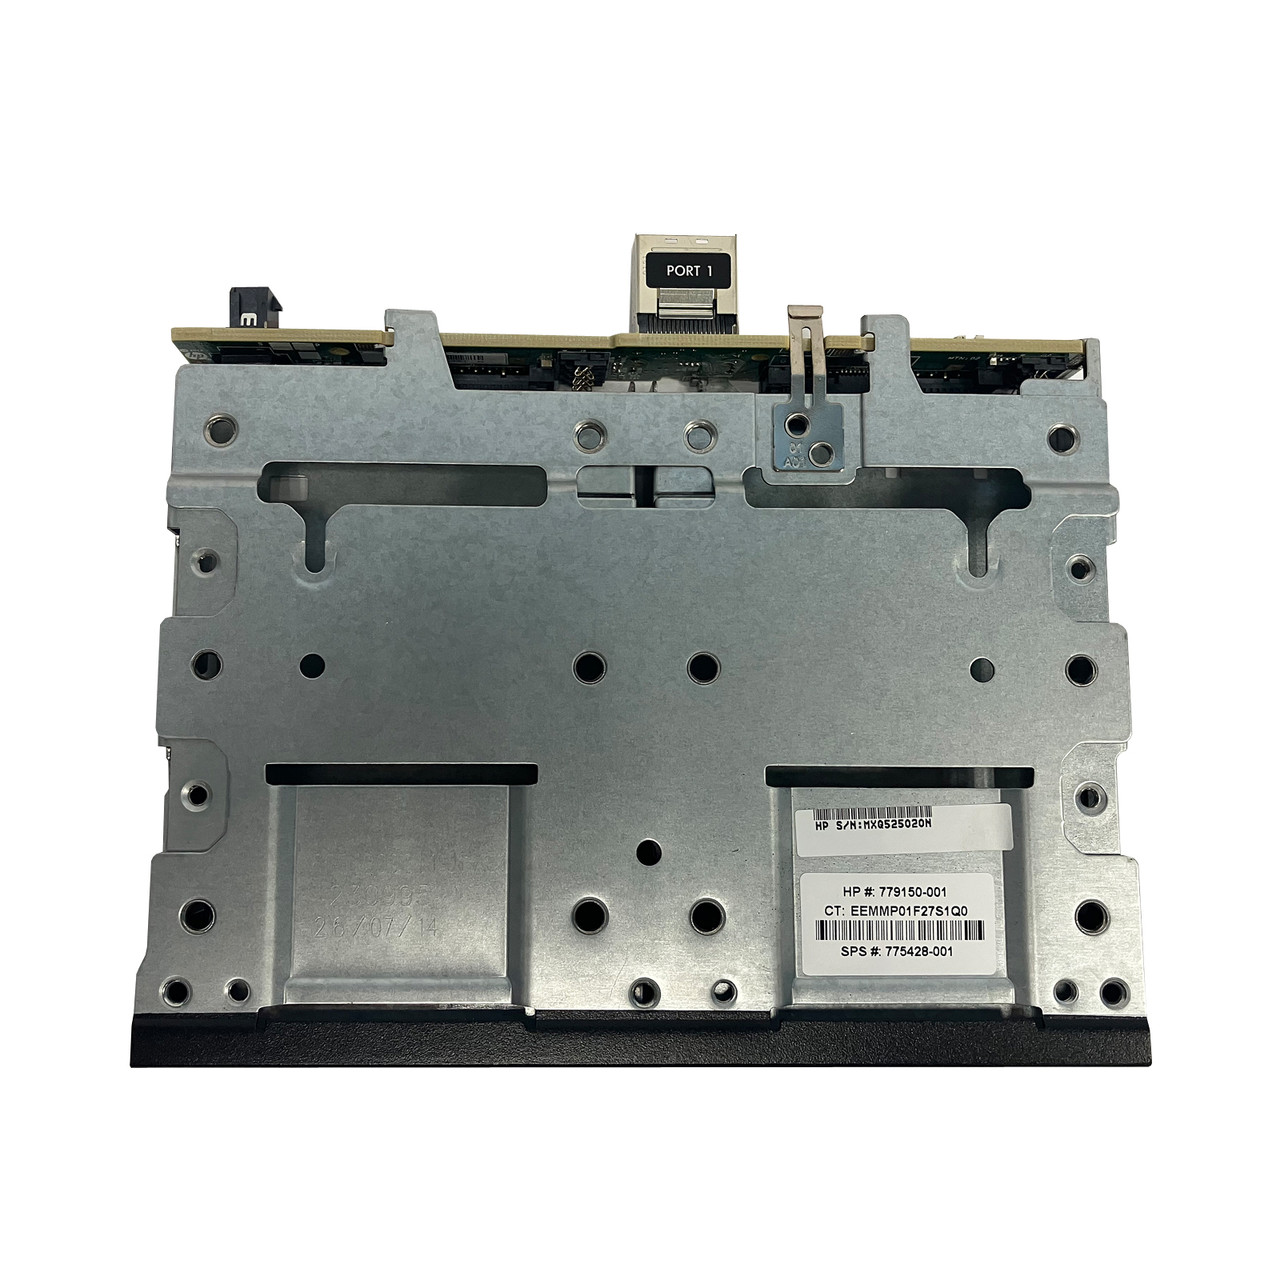 HPe 779150-001 Universal Media Bay Cage 775428-001